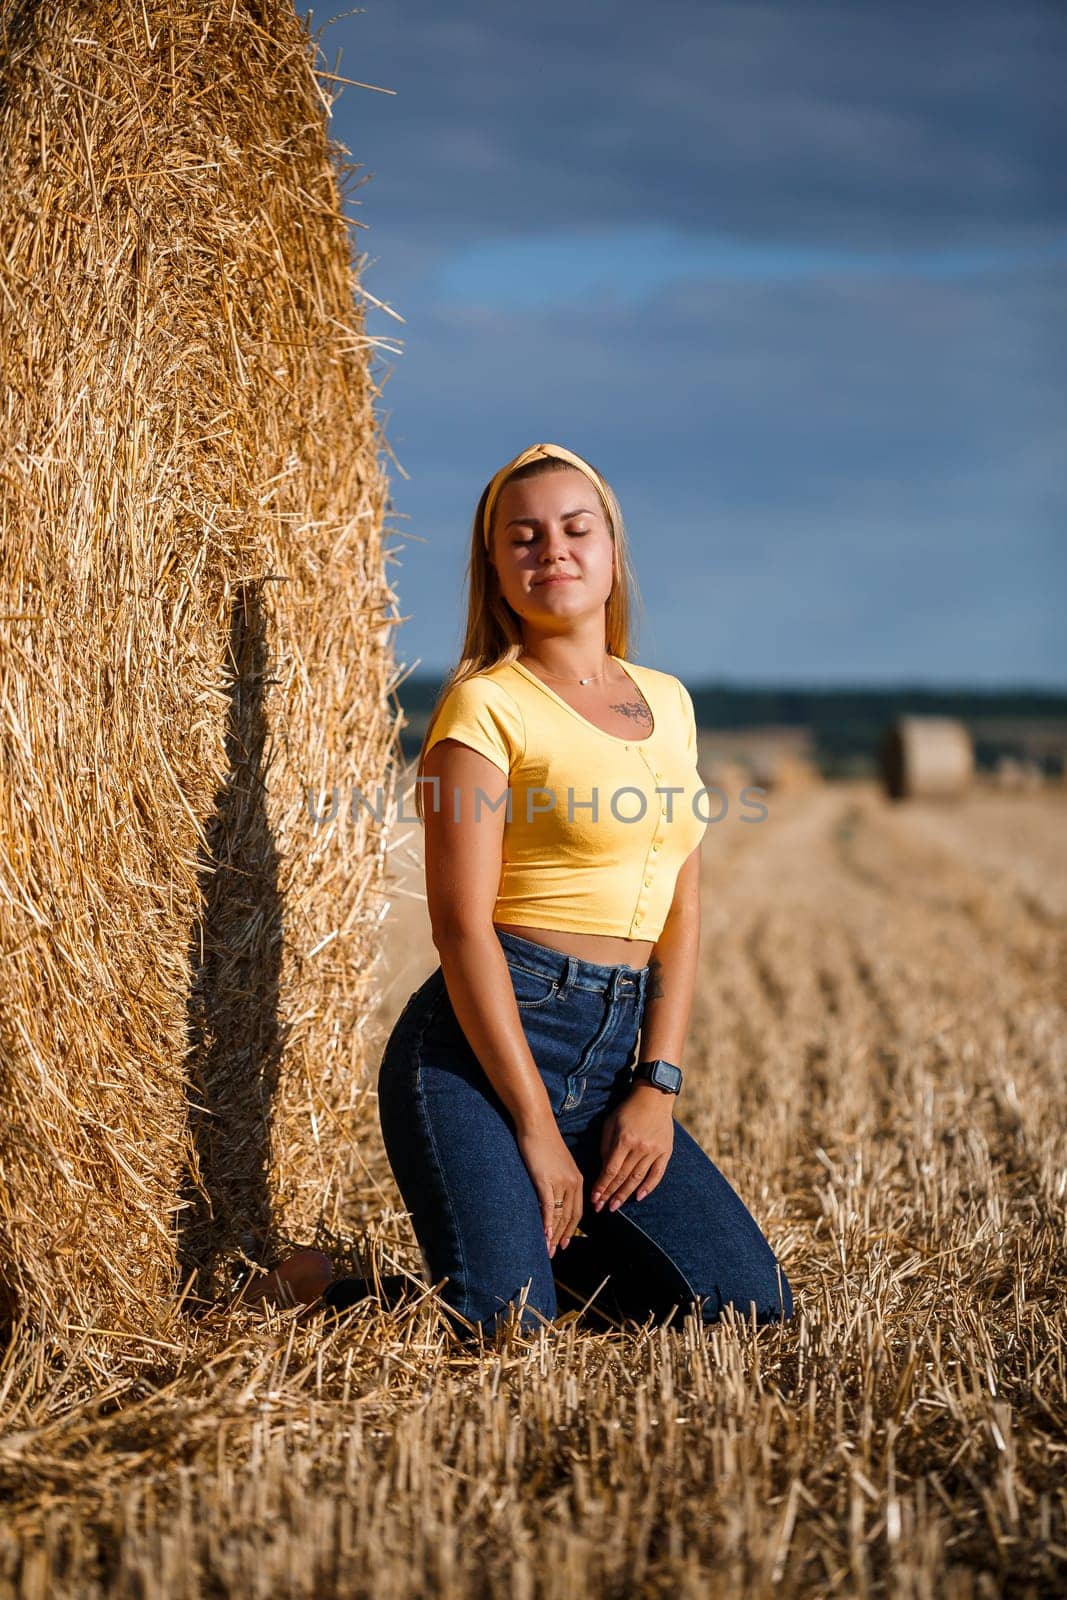 A young beautiful blonde stands on a mown wheat field near a huge sheaf of hay, enjoying nature. Nature in the village